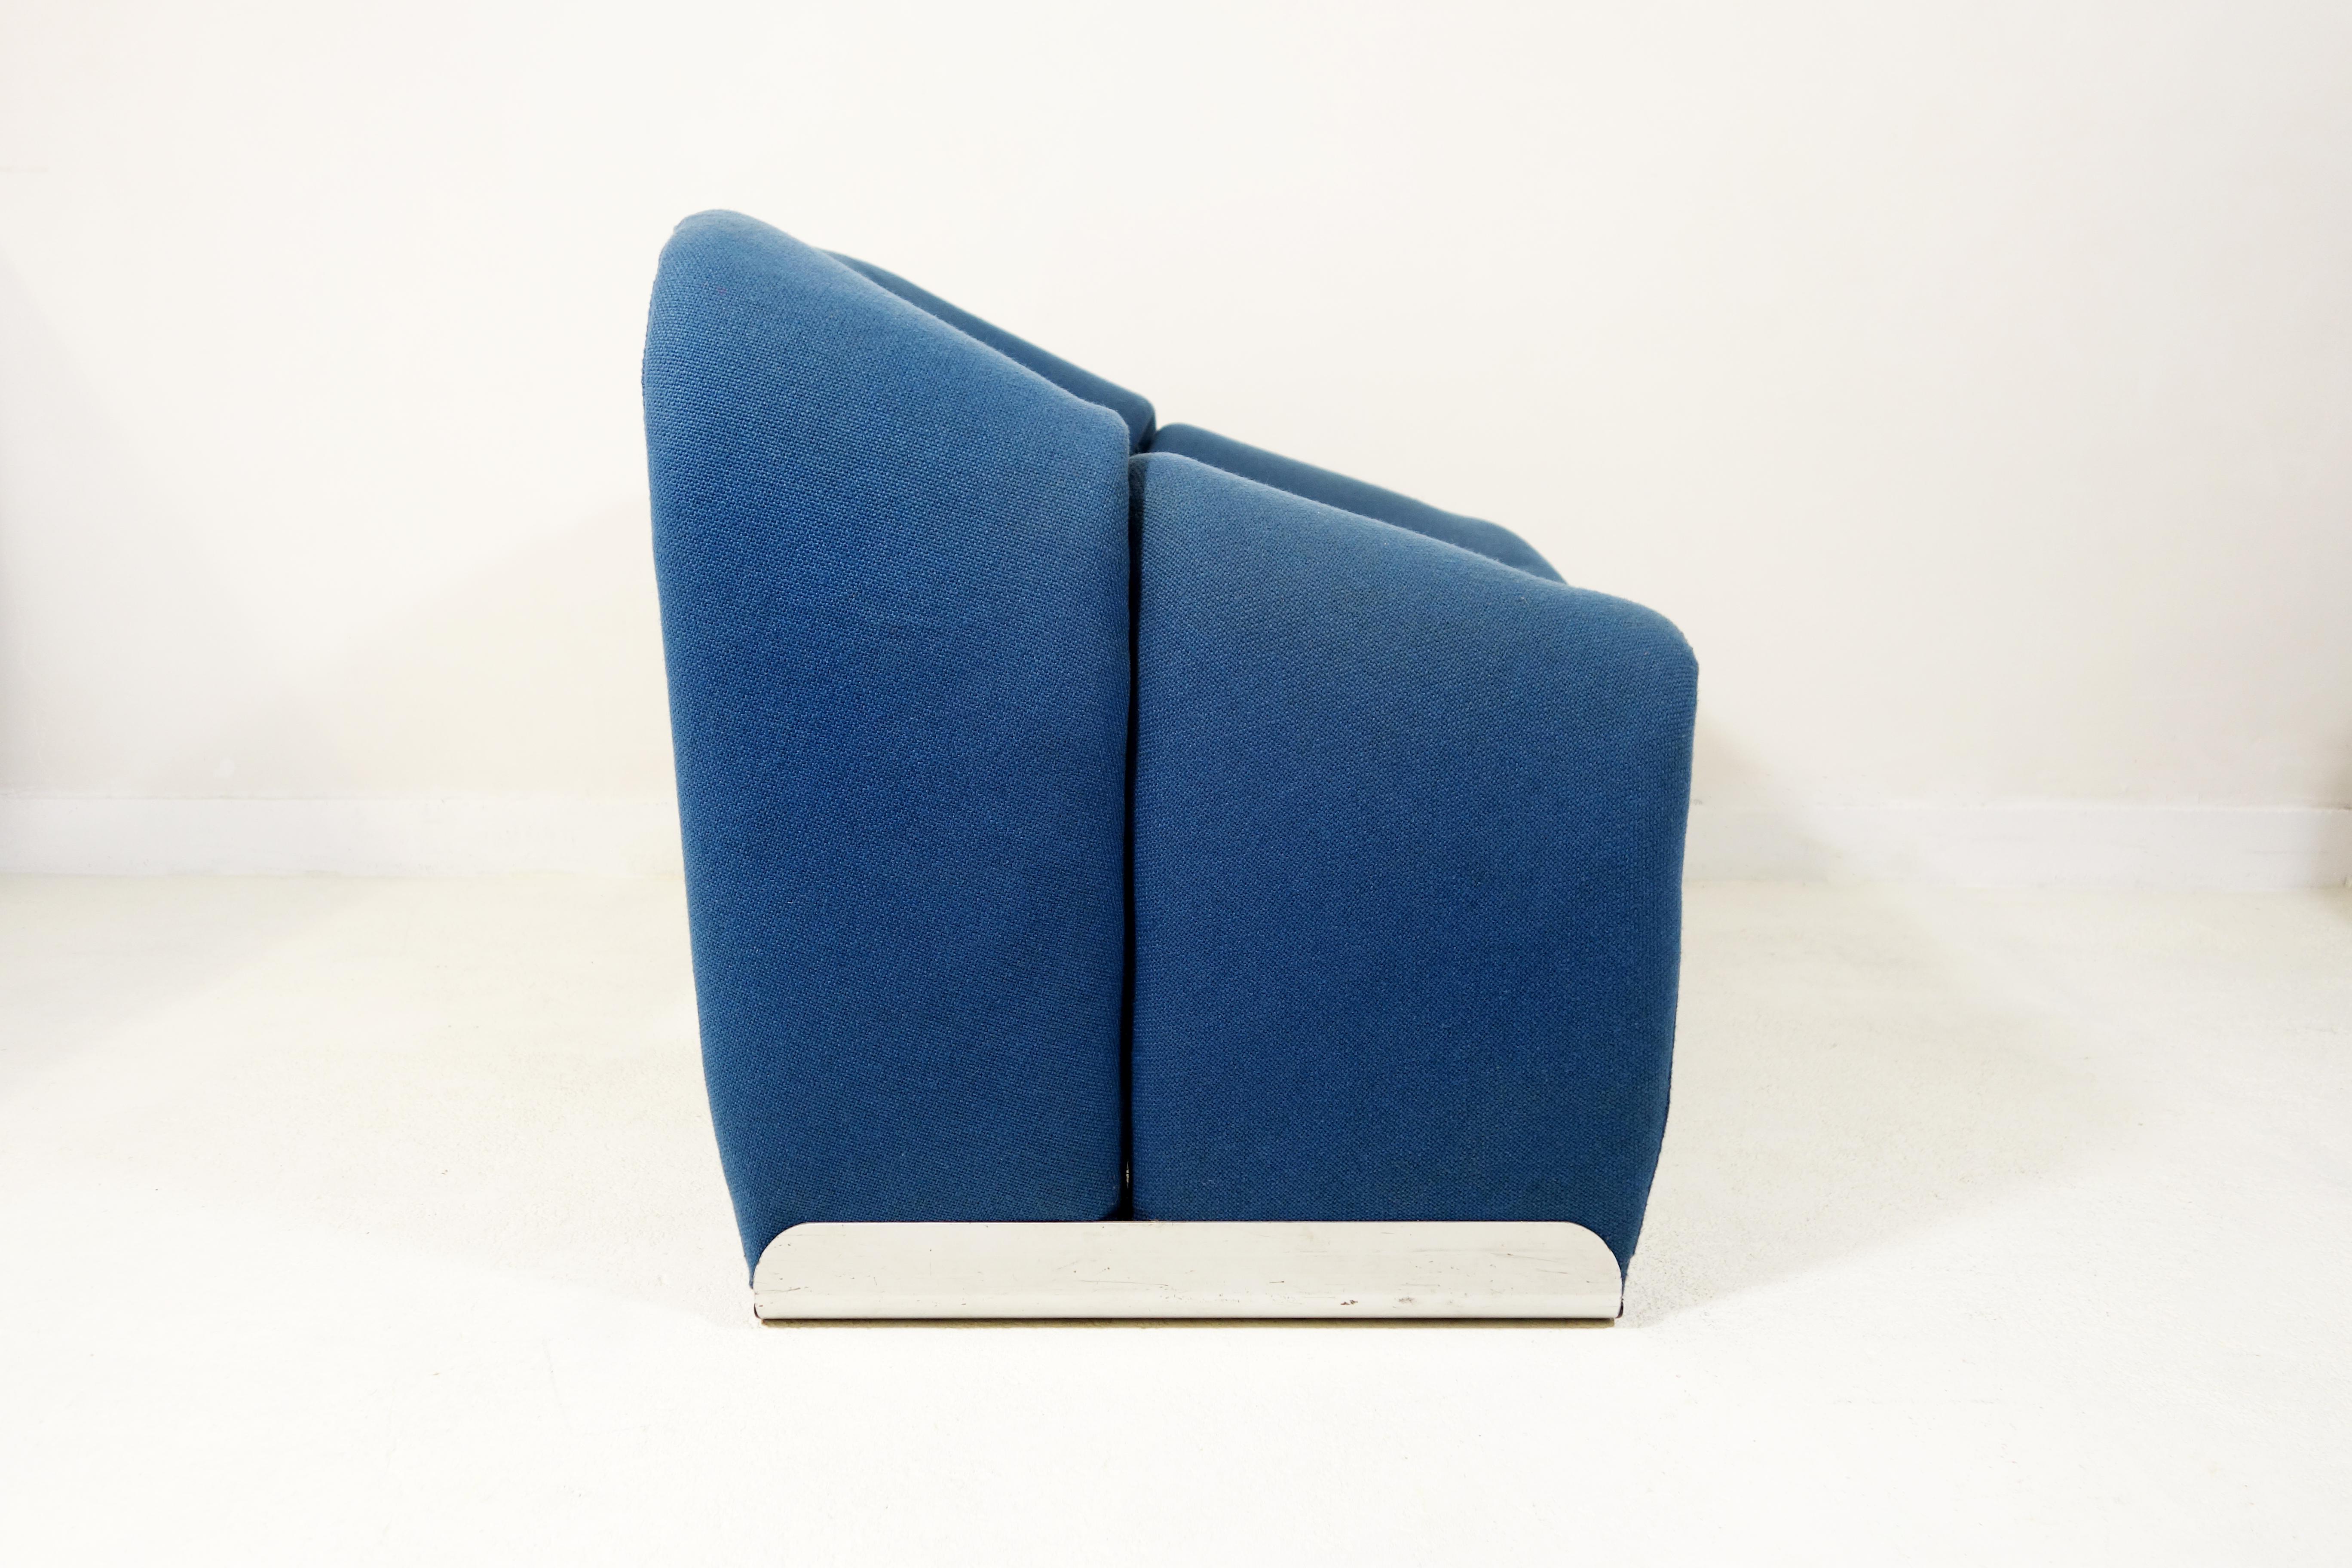 Mid-Century Modern Pair of Blue Midcentury Groovy Chairs F598 by Pierre Paulin for Artifort